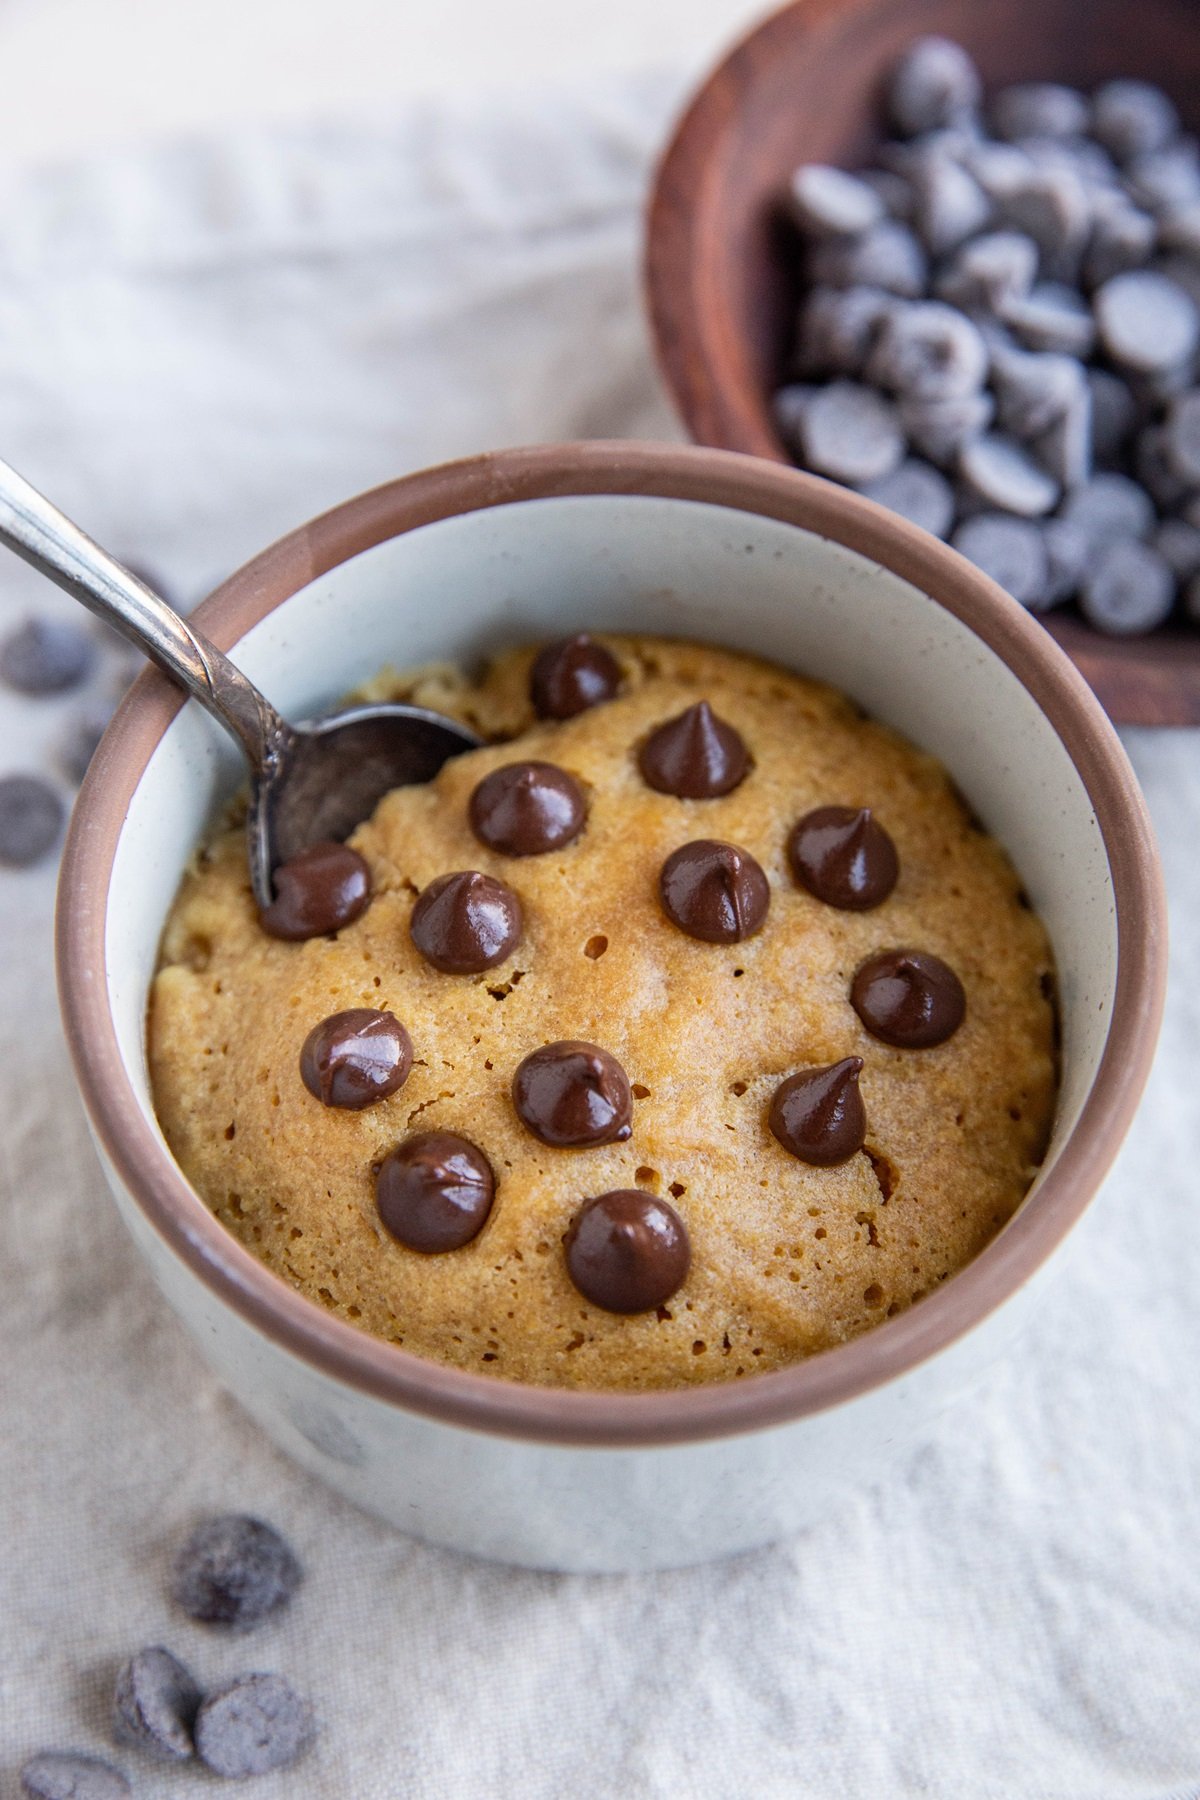 Peanut butter cookie in a mug with chocolate chips on top.